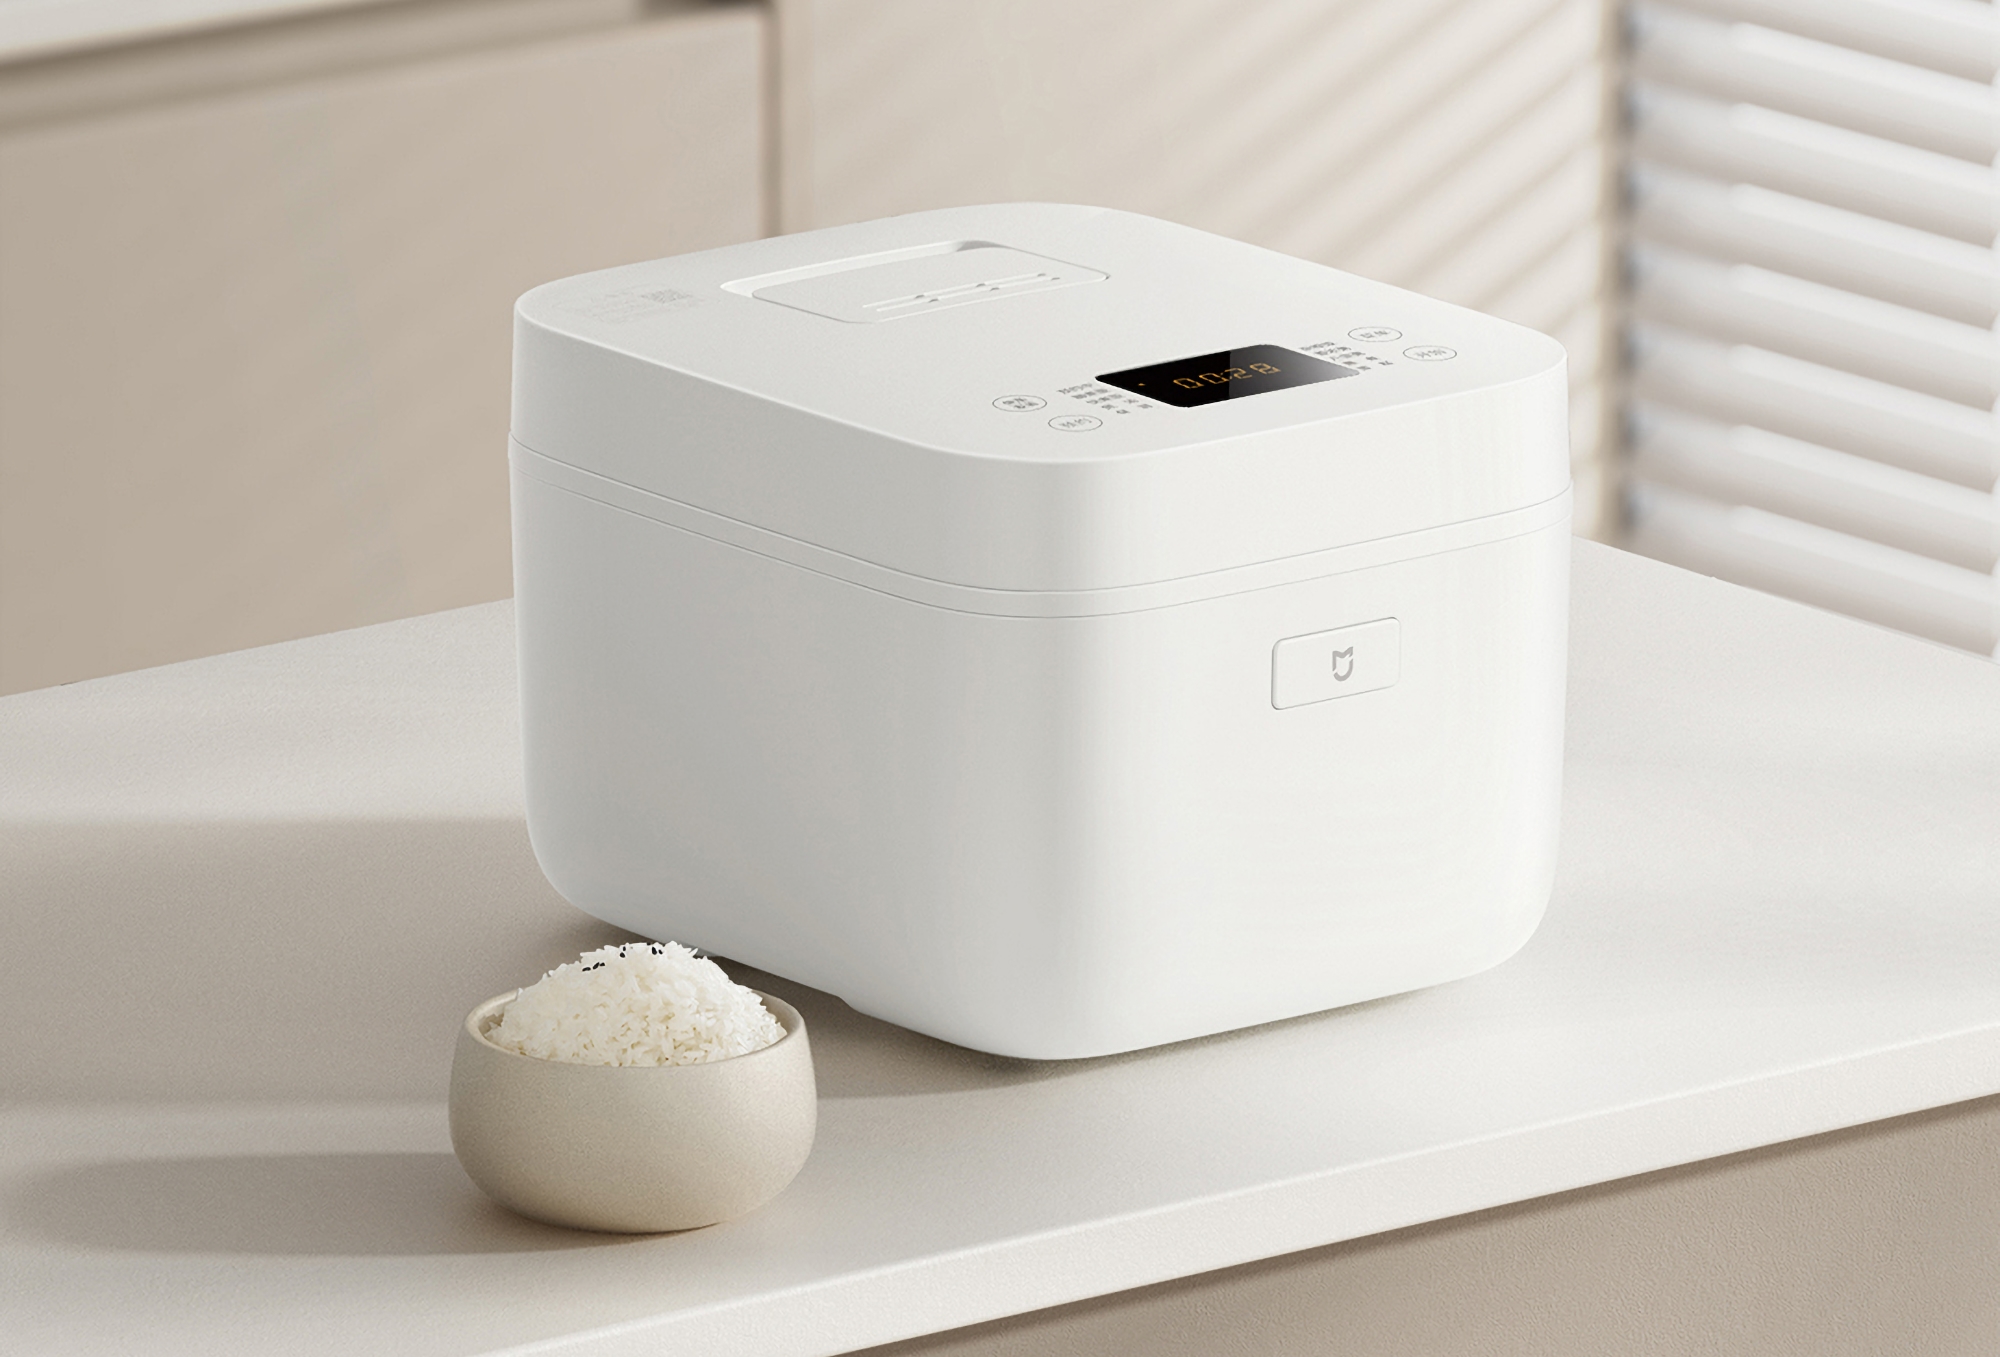 Xiaomi MiJia Electric Rice Cooker C1 Pro 4L: a smart rice cooker for $29